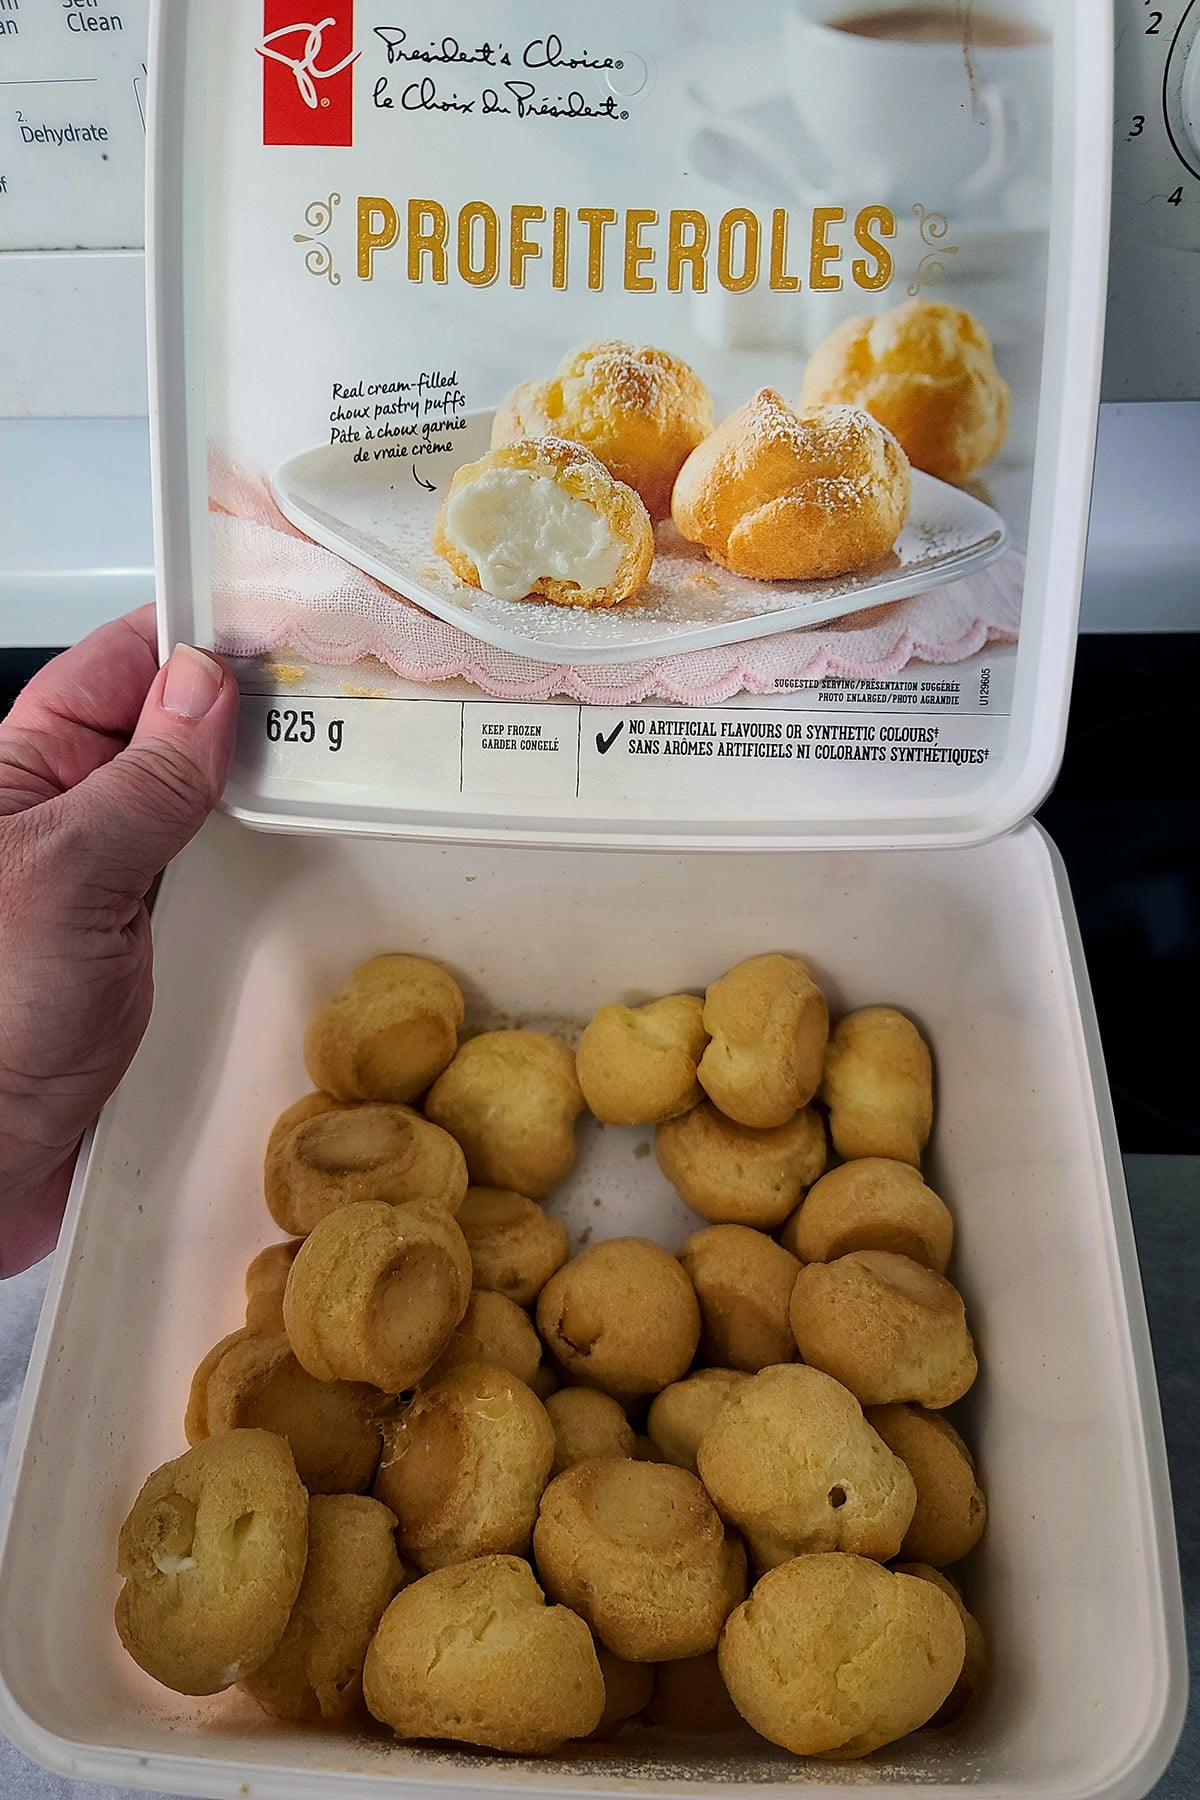 A hand holds open a box of frozen President’s Choice profiteroles.